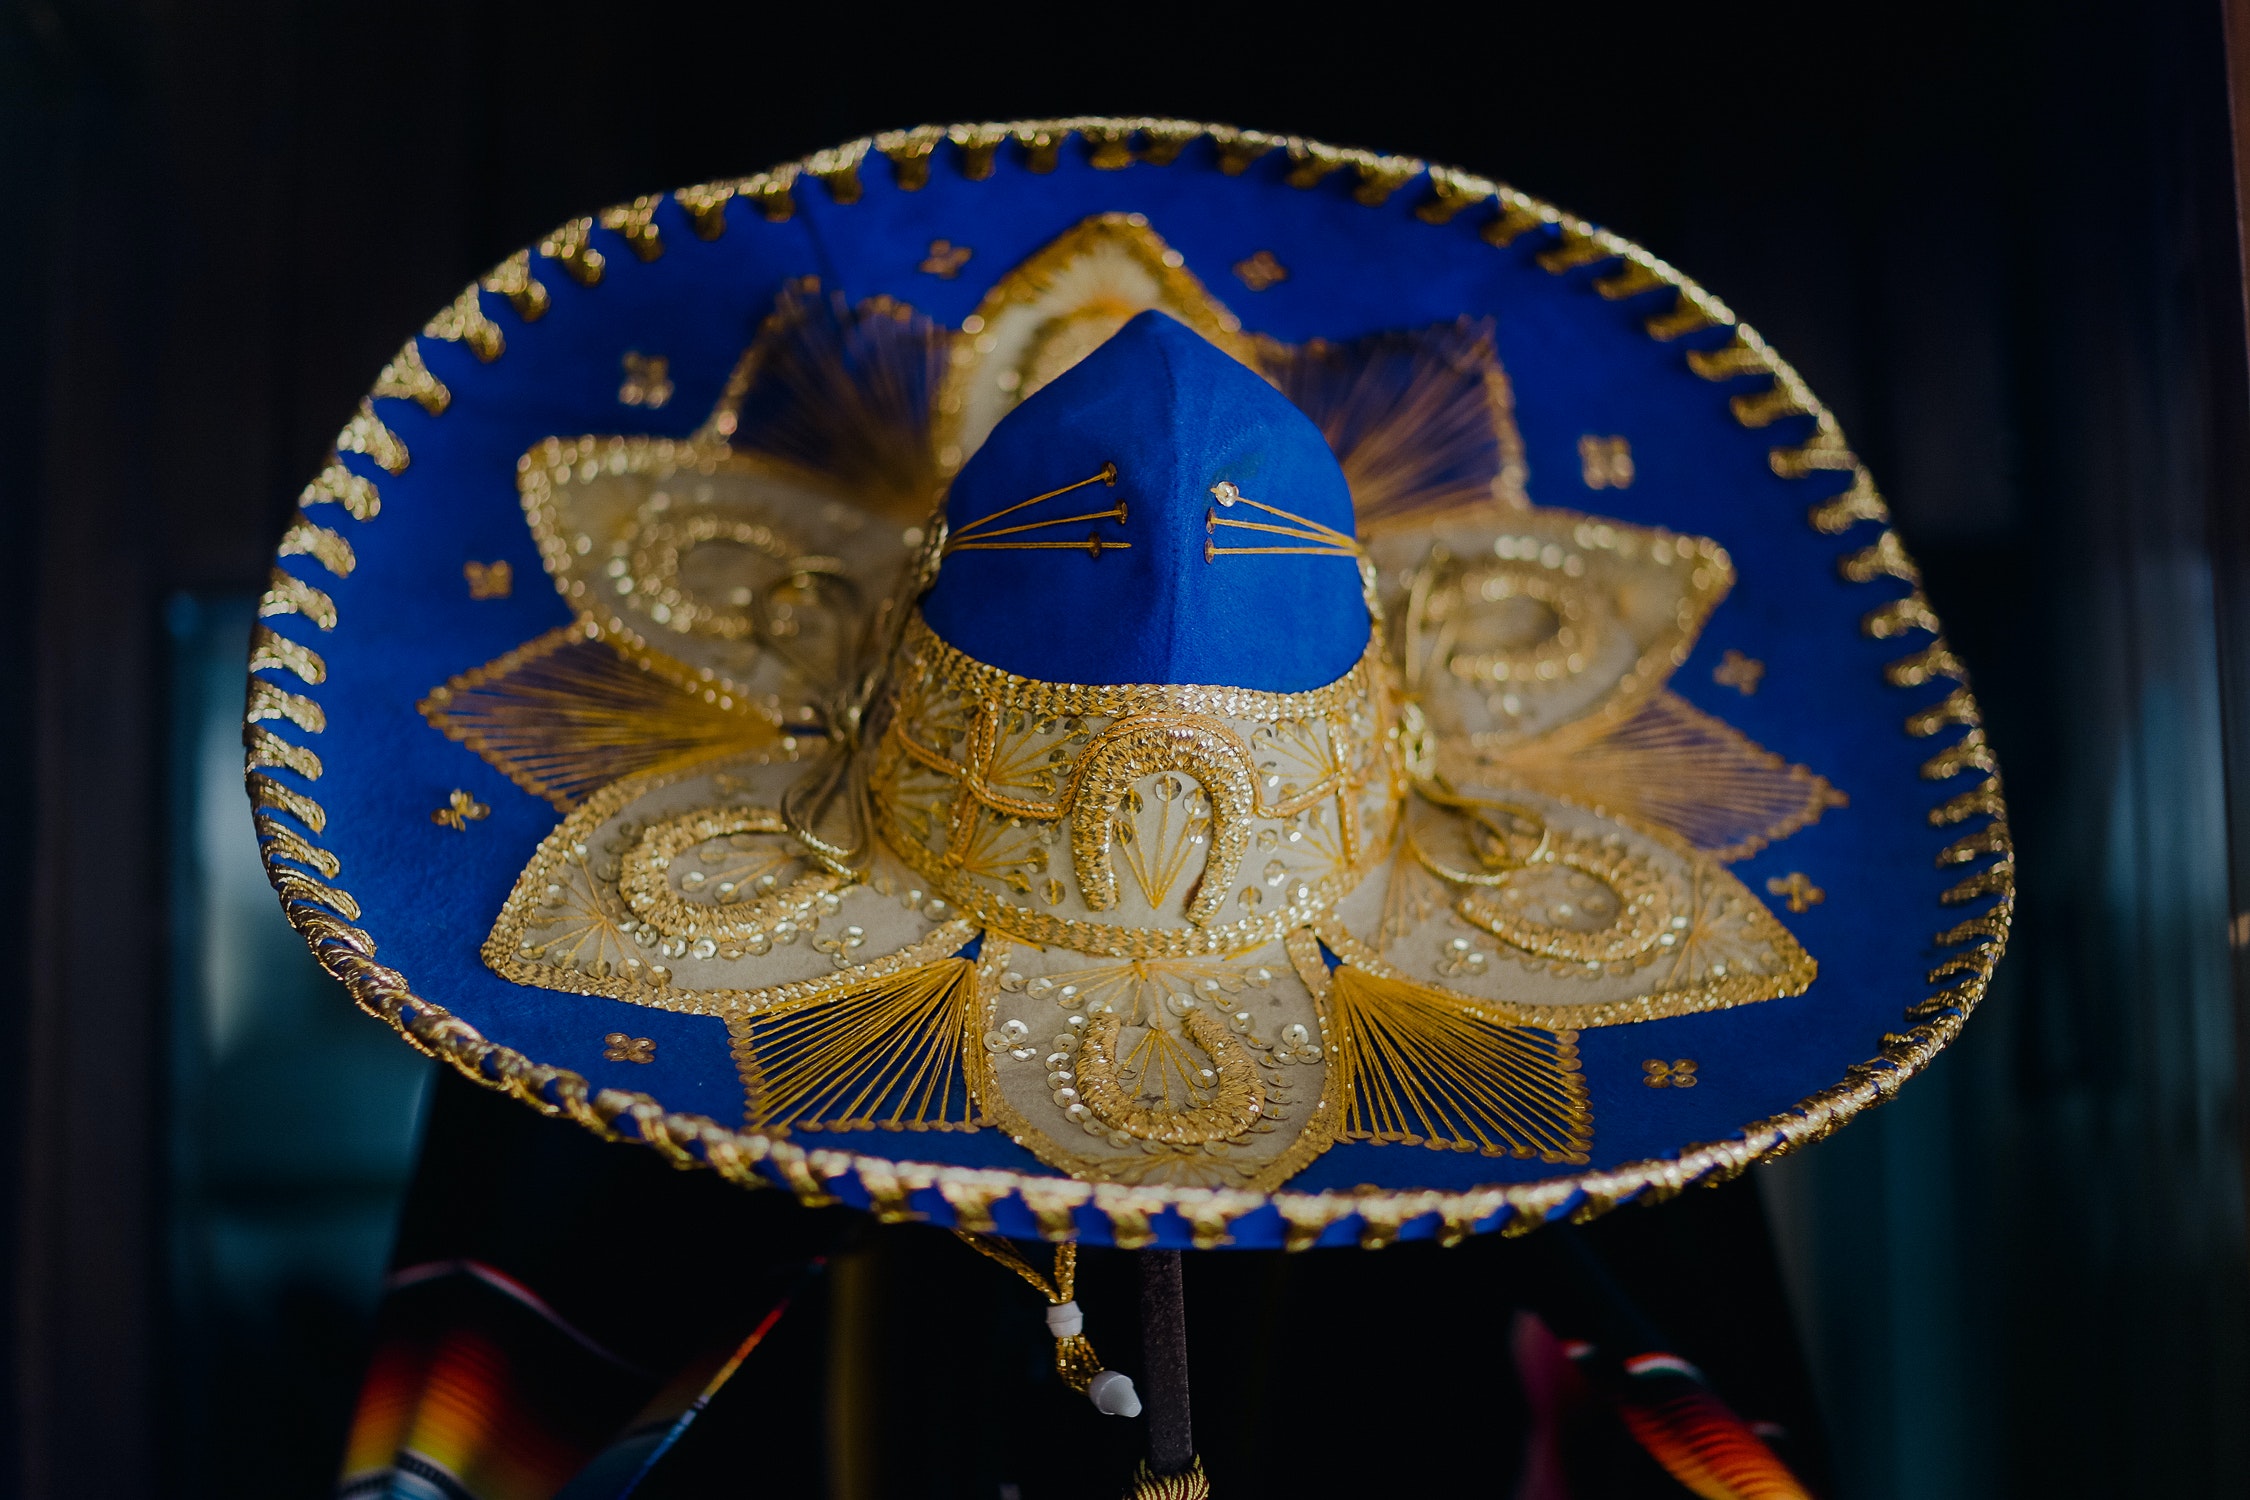 Sombrero used as part of the mariachi outfit